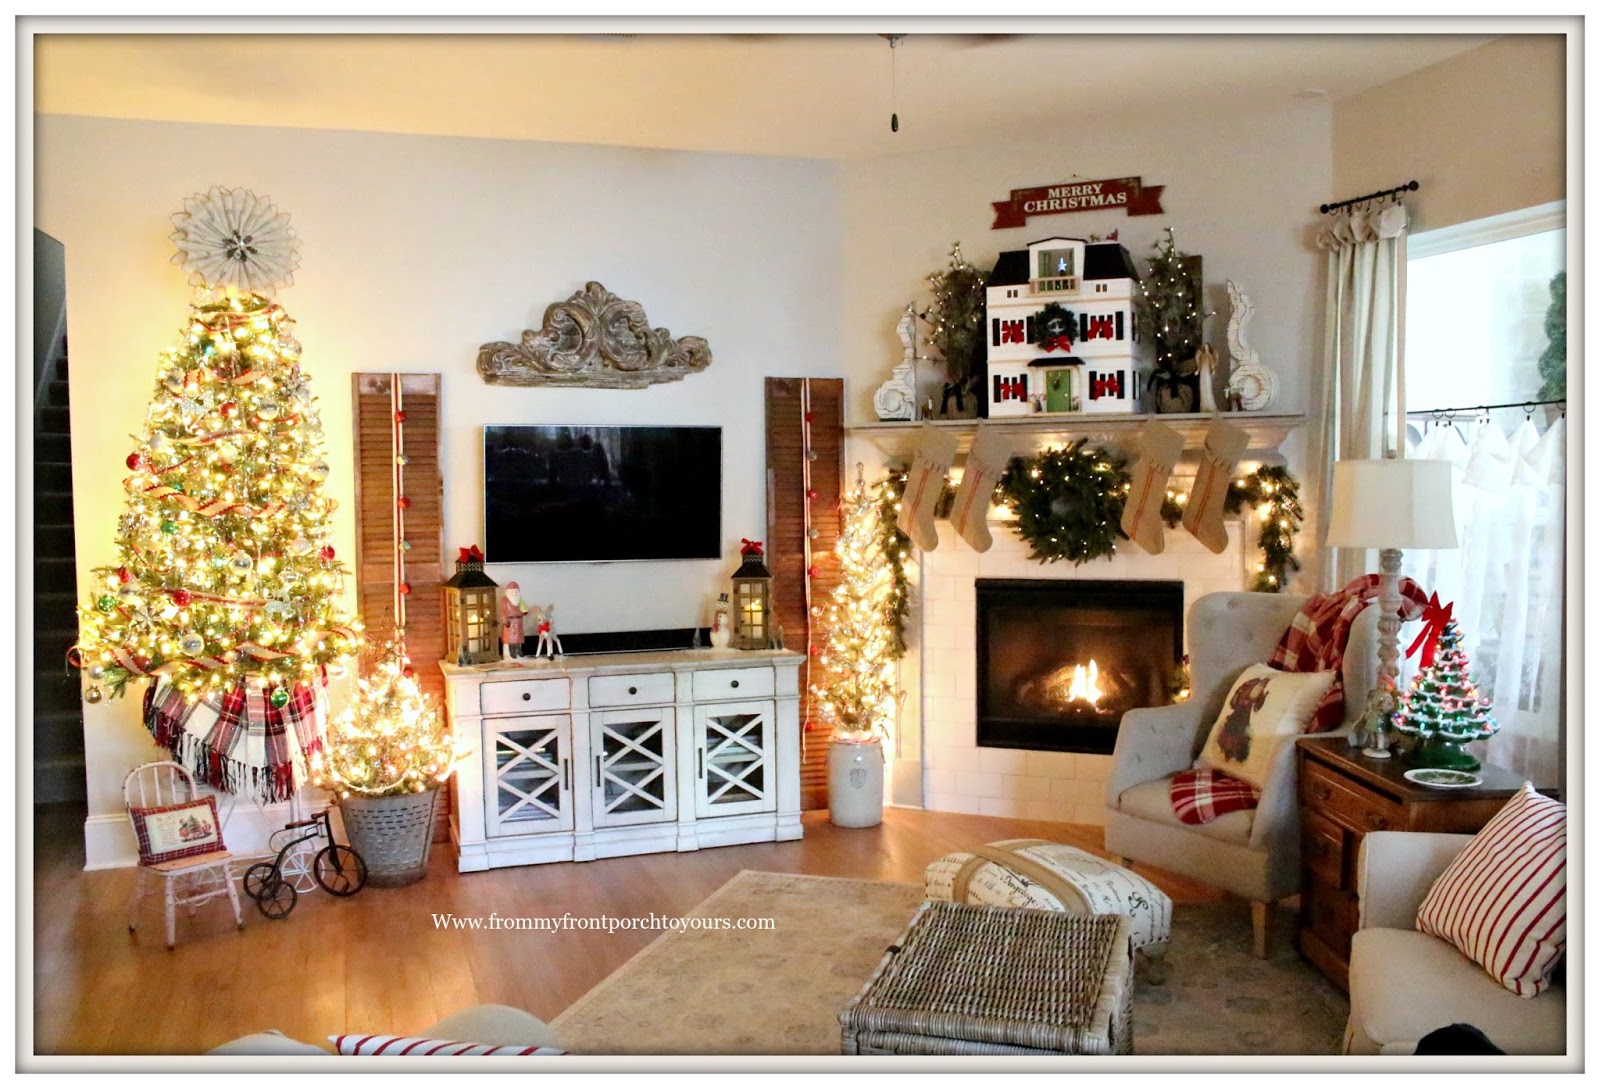 From My Front Porch To Yours: French Country Farmhouse Christmas Mantel ...